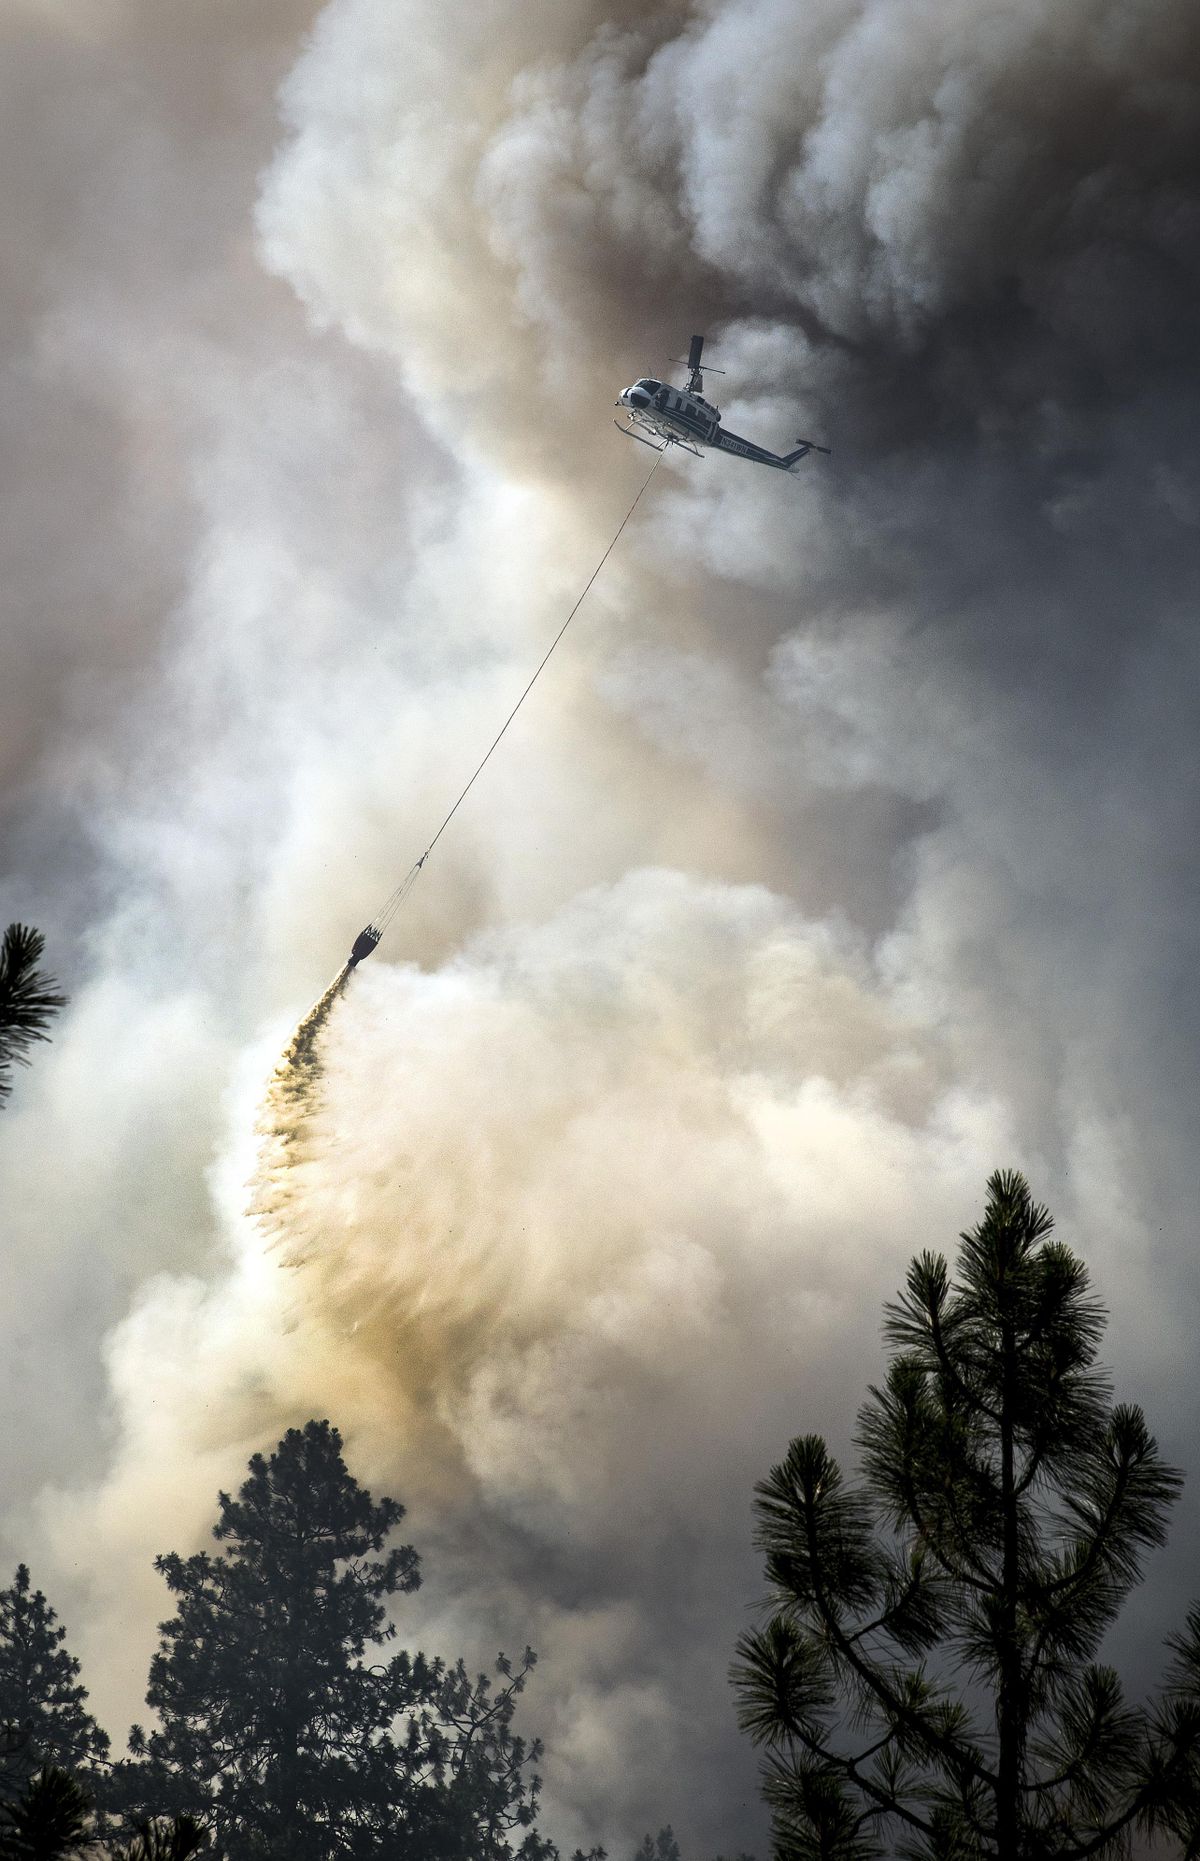 Washington spent $164 million fighting 1,500 wildfires that burned 1,005,423 acres in 2015. (Colin Mulvany / The Spokesman-Review)